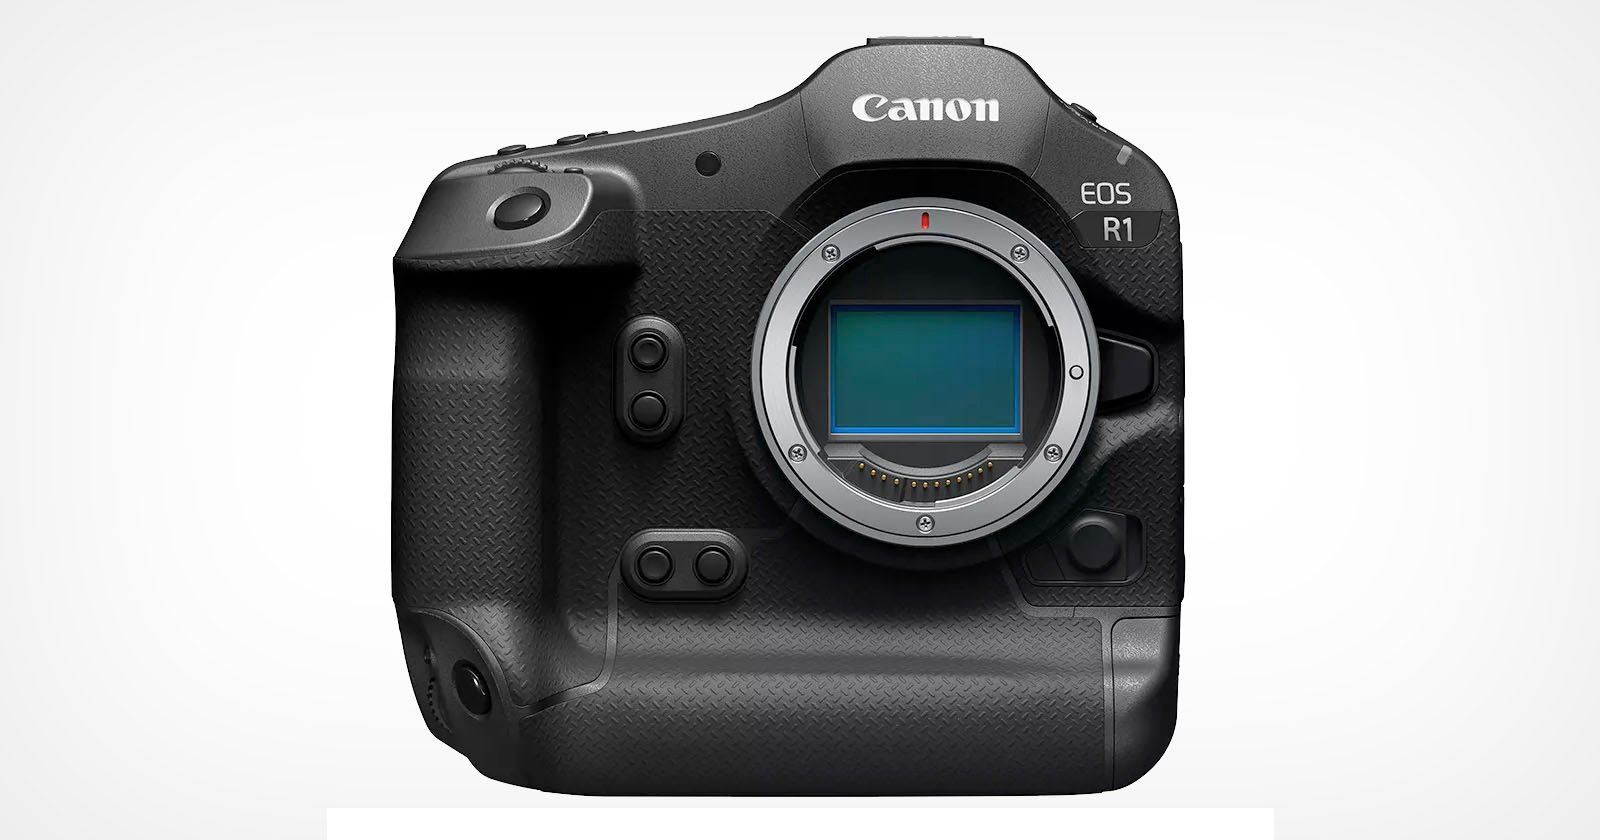 A high-resolution image of the Canon EOS R1 camera, showcasing its black body with the lens mount exposed. The camera features a textured grip, various buttons, and dials. The Canon logo and EOS R1 are visible on the top right front of the camera. The background is white.